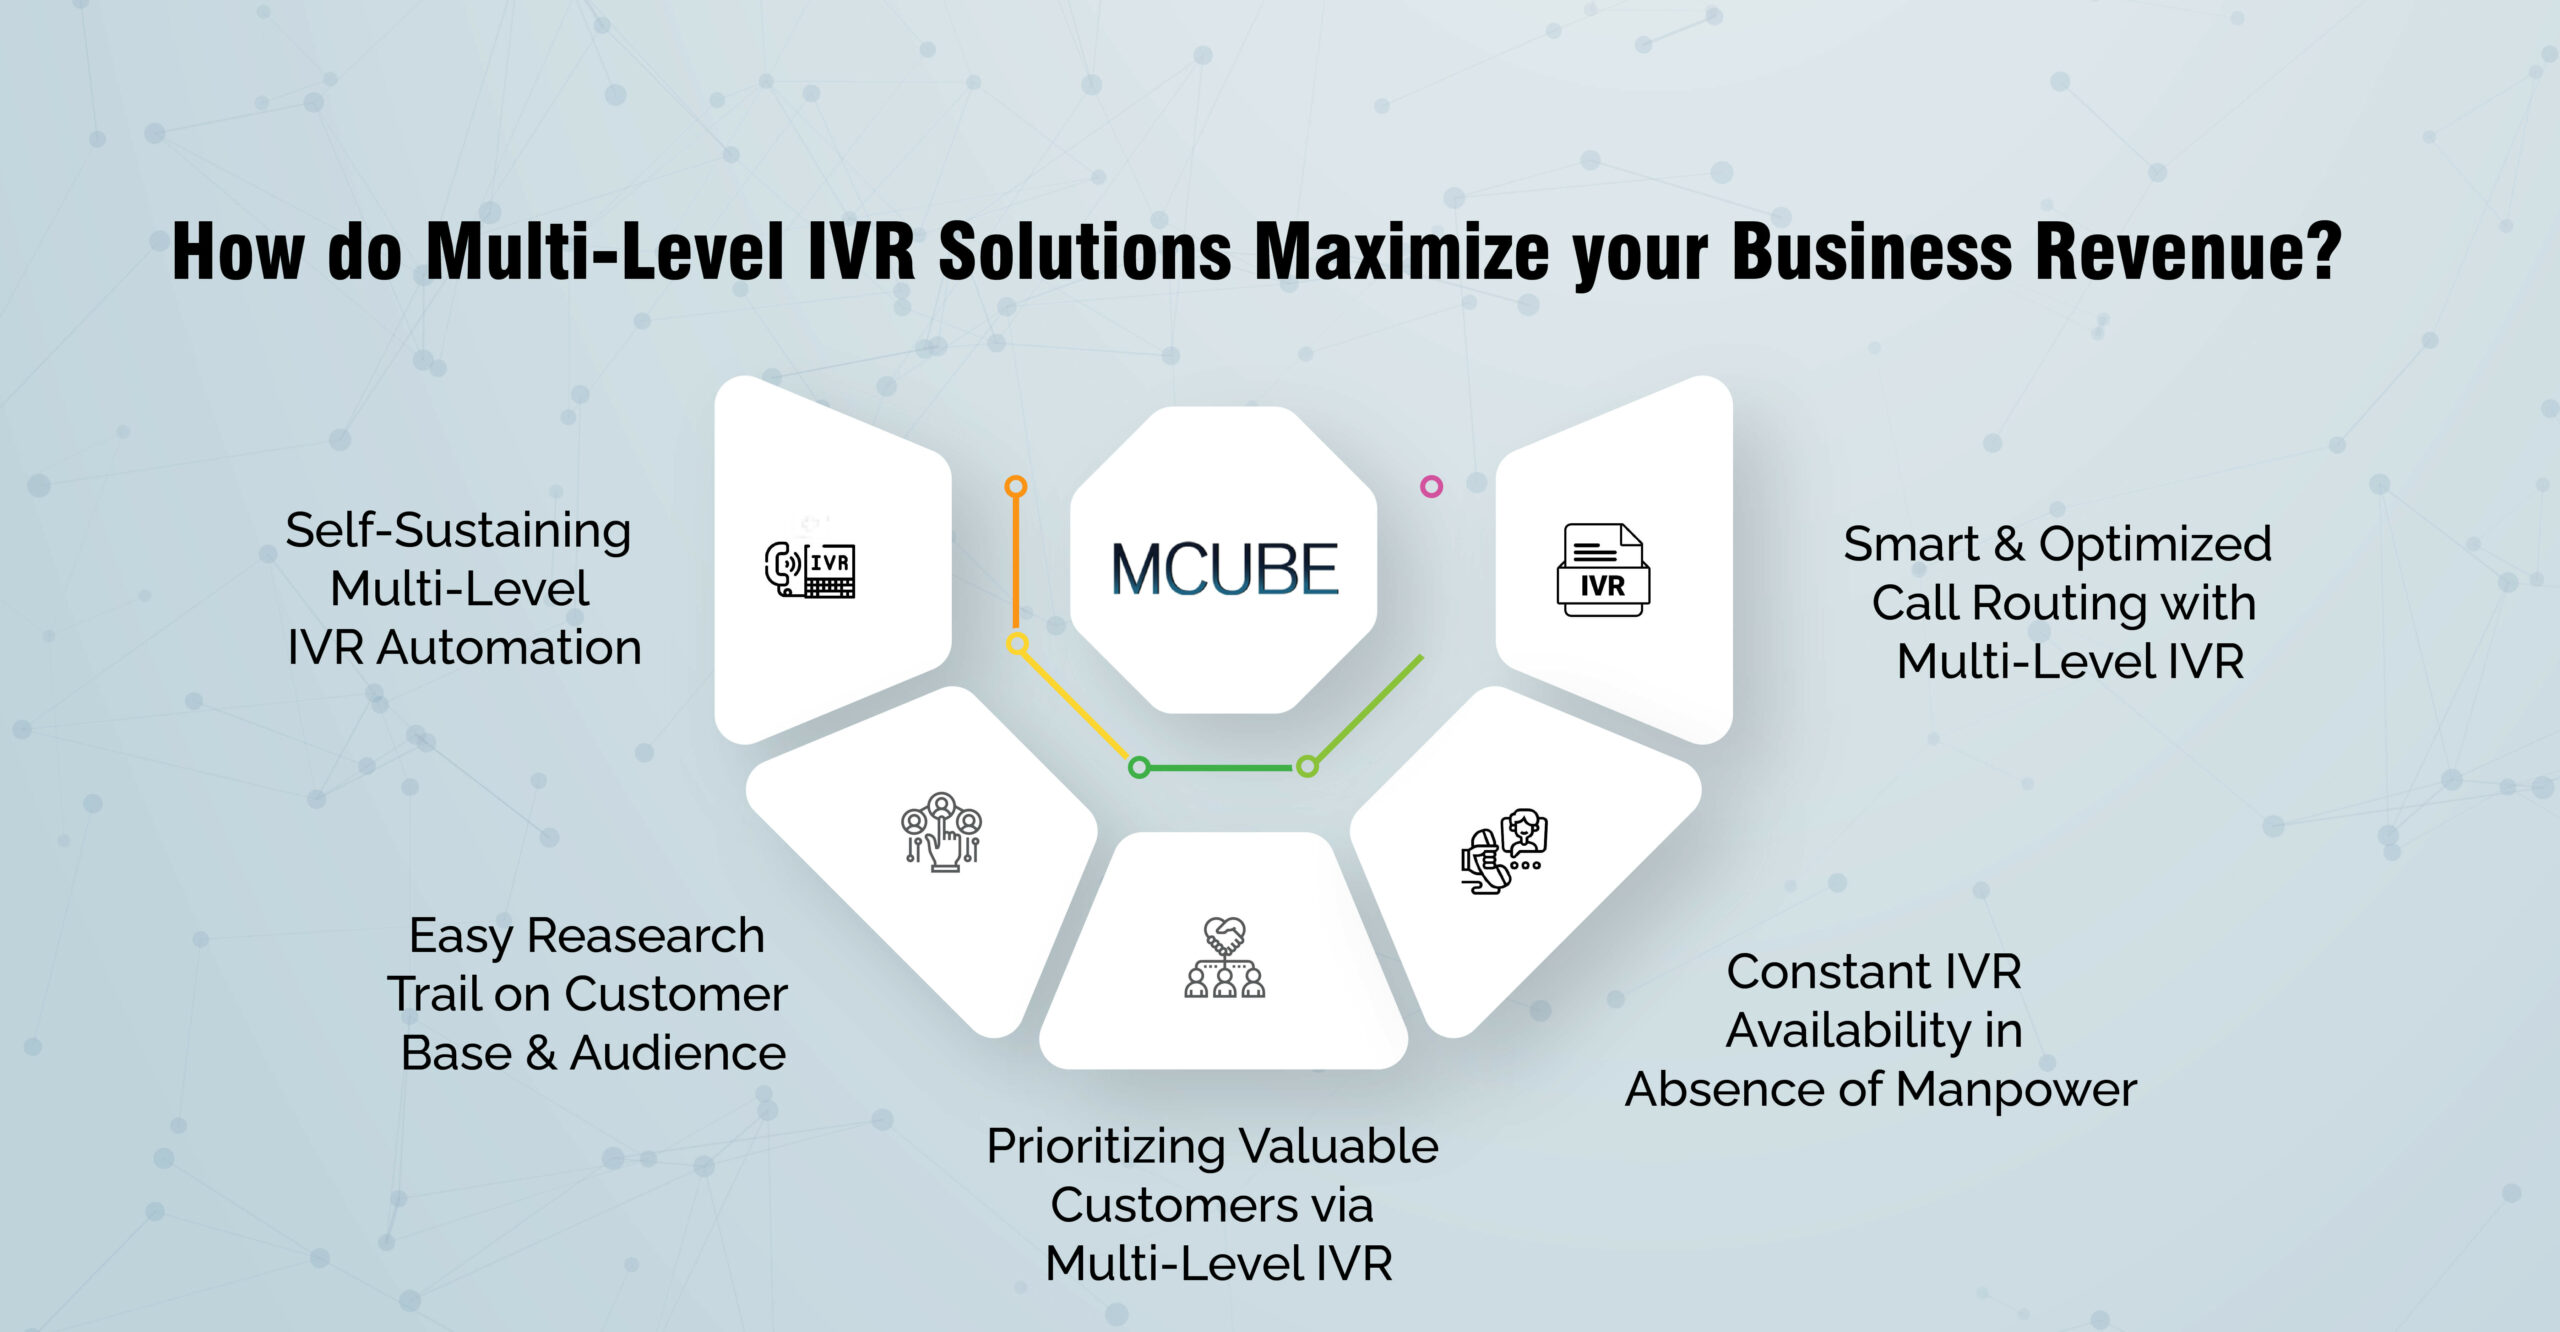 IVR Solutions